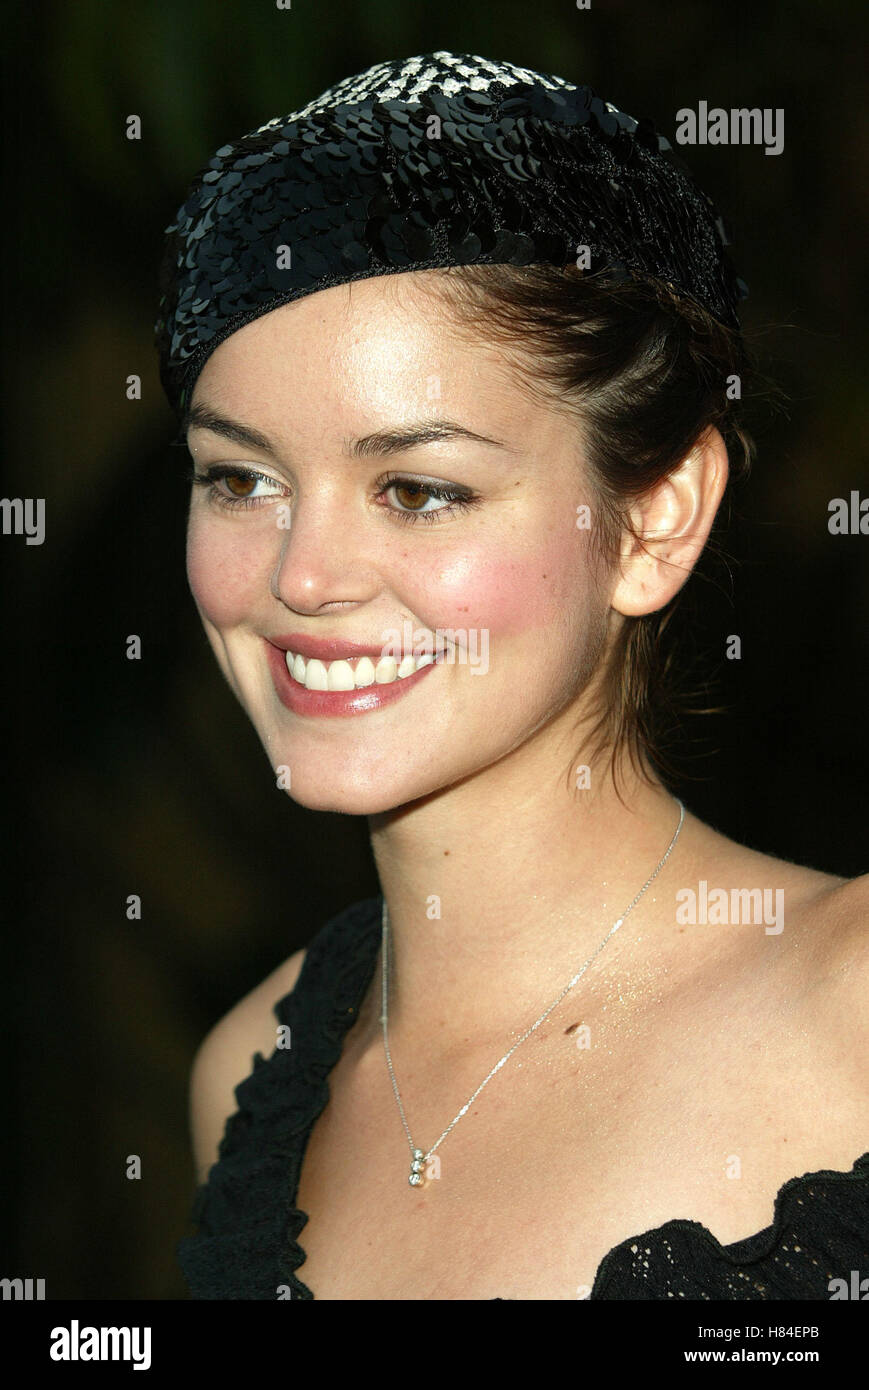 NORA ZEHETNER 1 GIANT LEAP FILM PREMIERE CHINESE THEATRE HOLLYWOOD LOS ANGELES USA 06 May 2002 Stock Photo